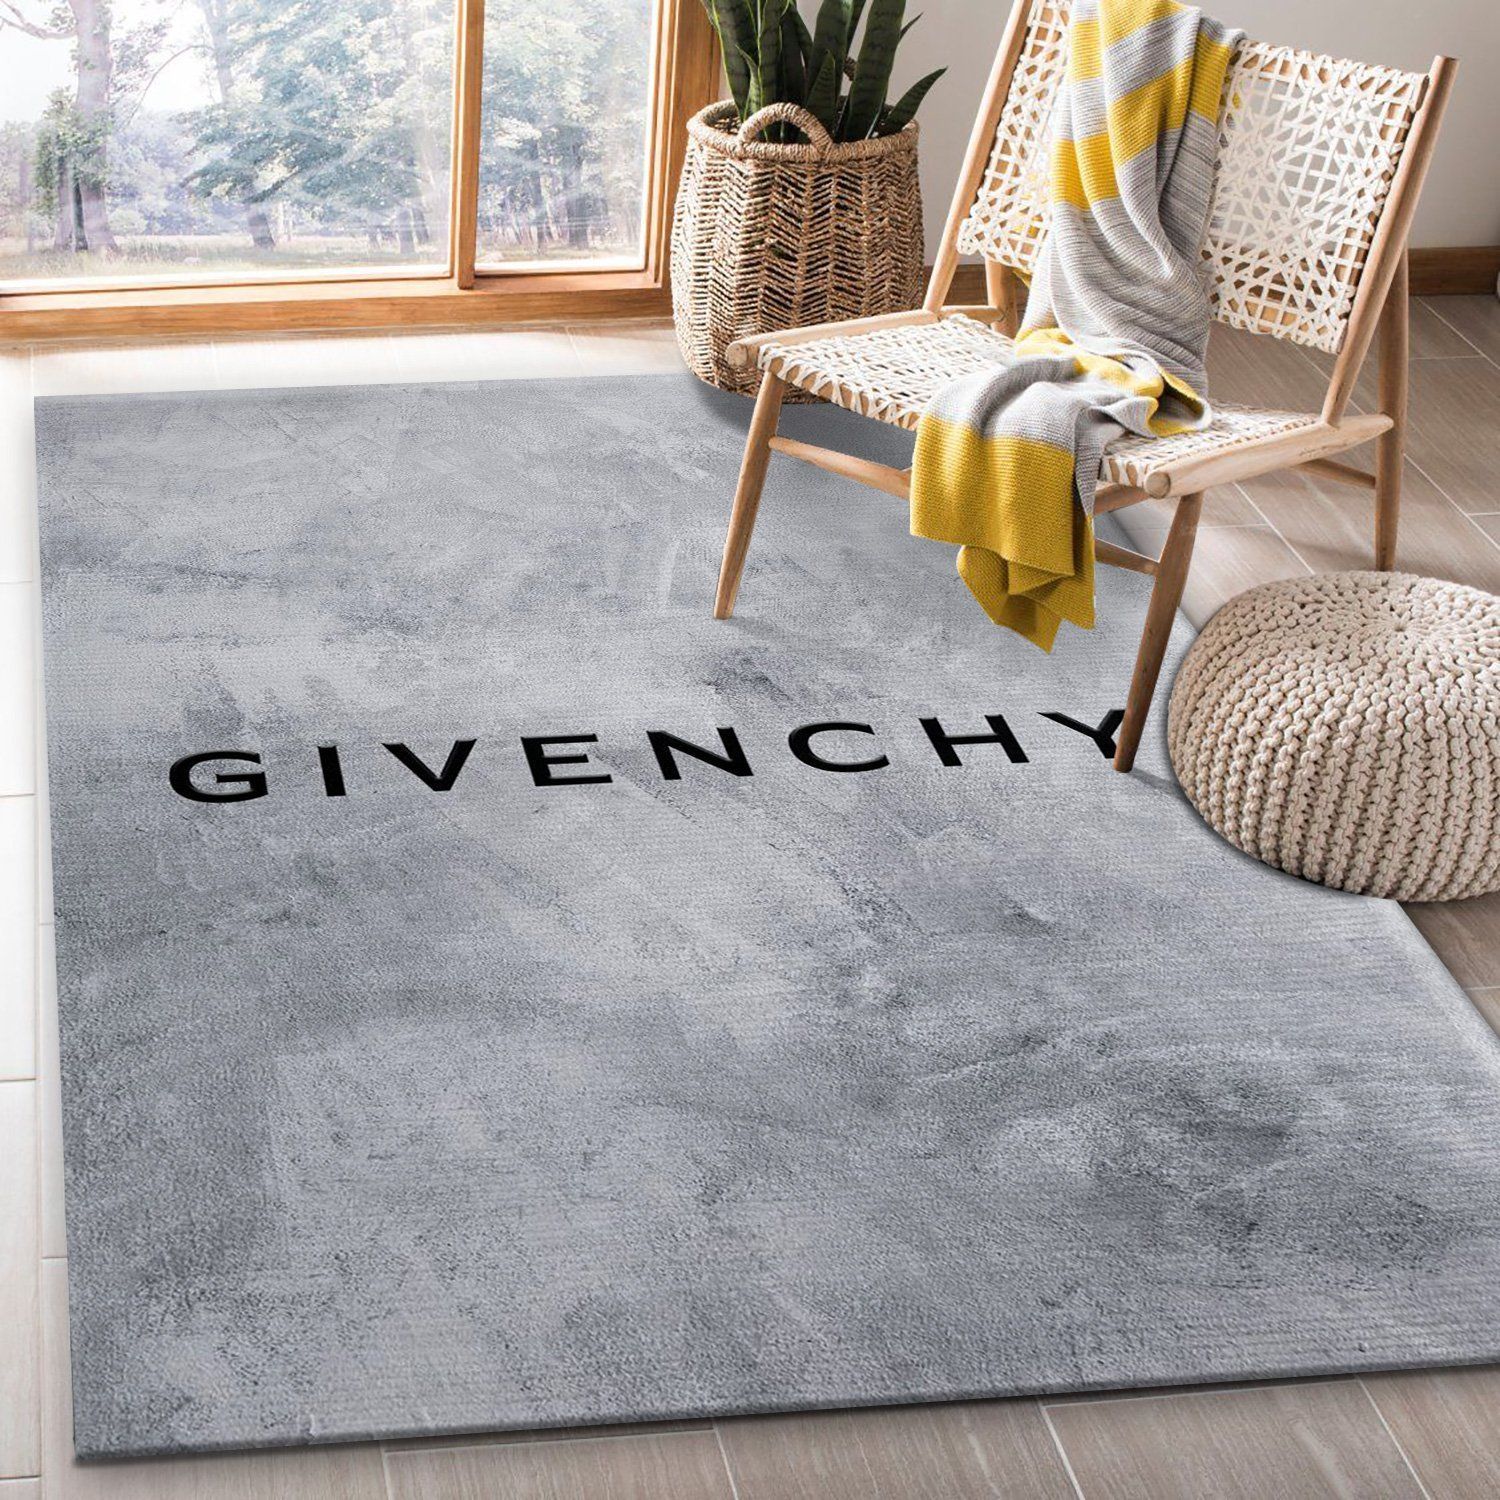 Givenchy Area Rugs Living Room Rug Christmas Gift US Decor - Indoor Outdoor Rugs 2